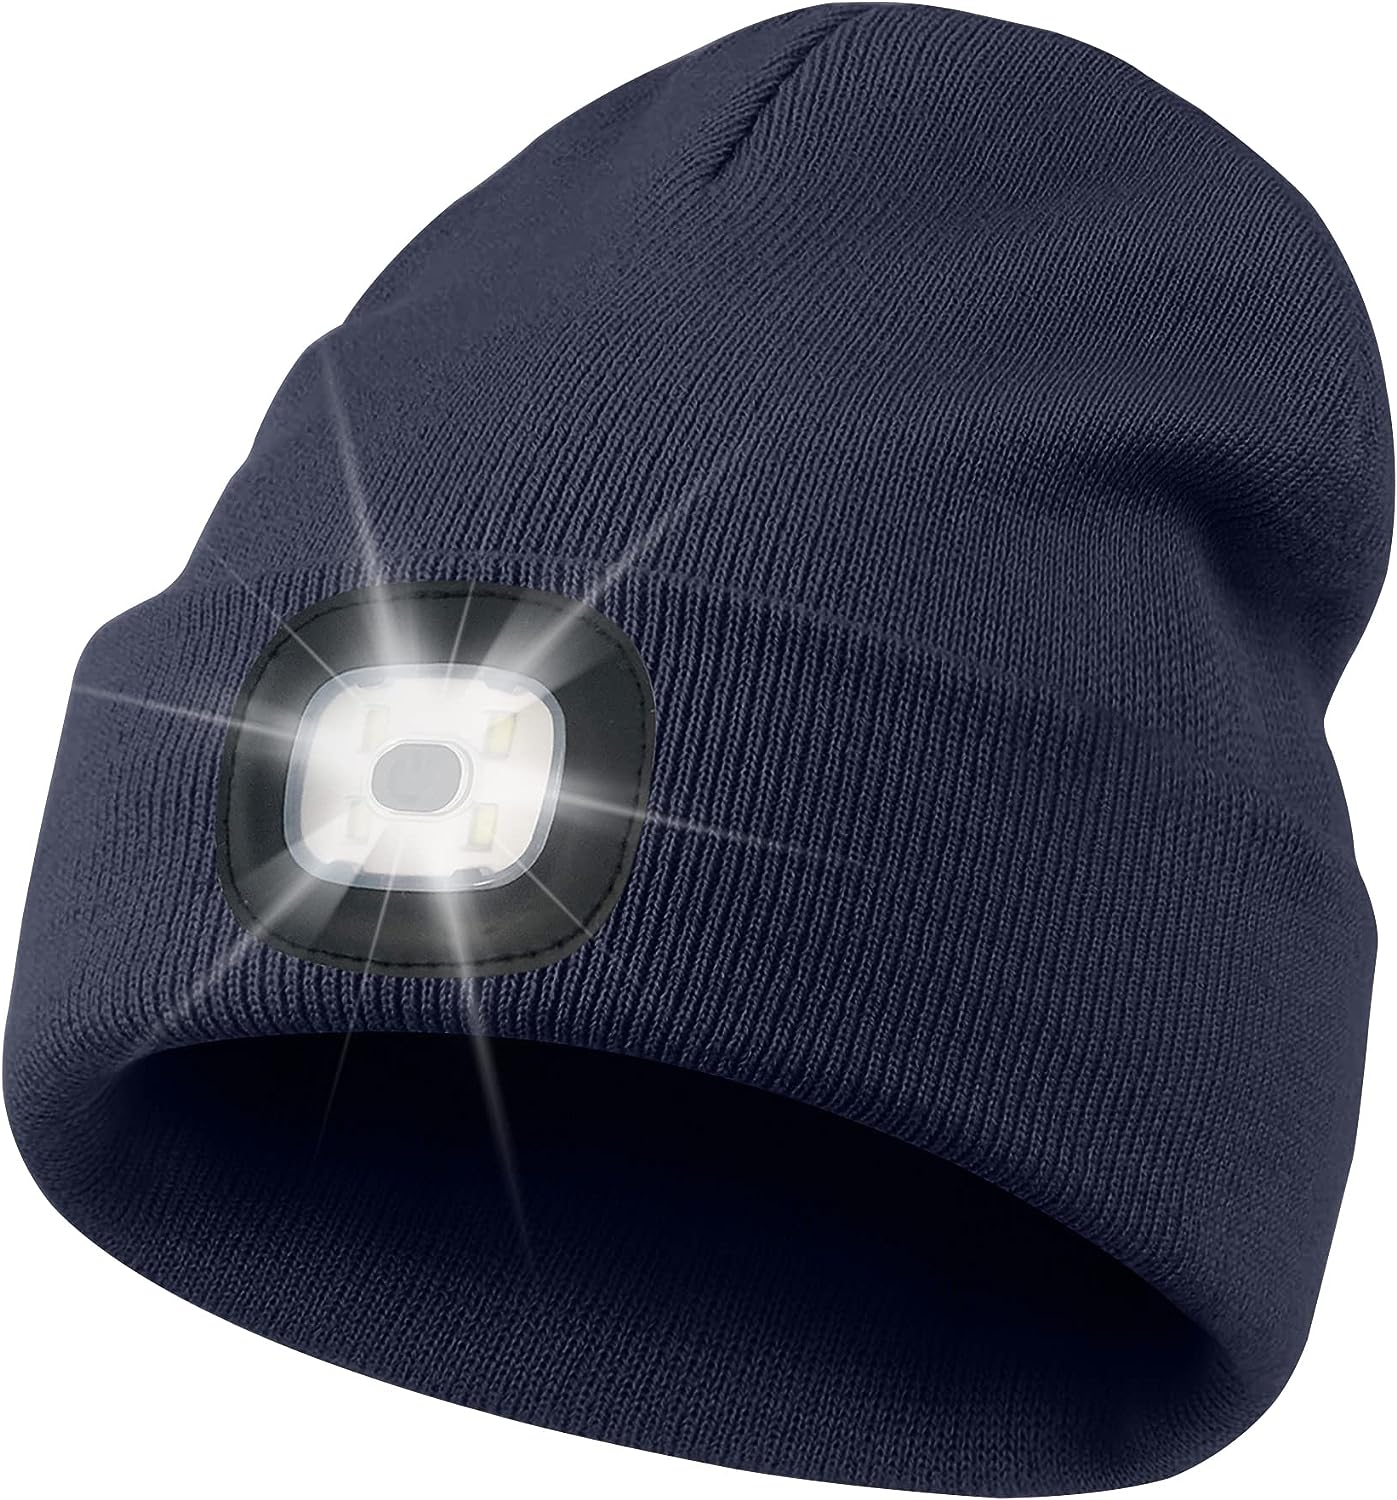 SOCTKE LED Beanie Hat with Light,USB Rechargeable 4 LED Headlamp Hat,Gifts for Men Winter Warm Knitted Caps,Used for Outside